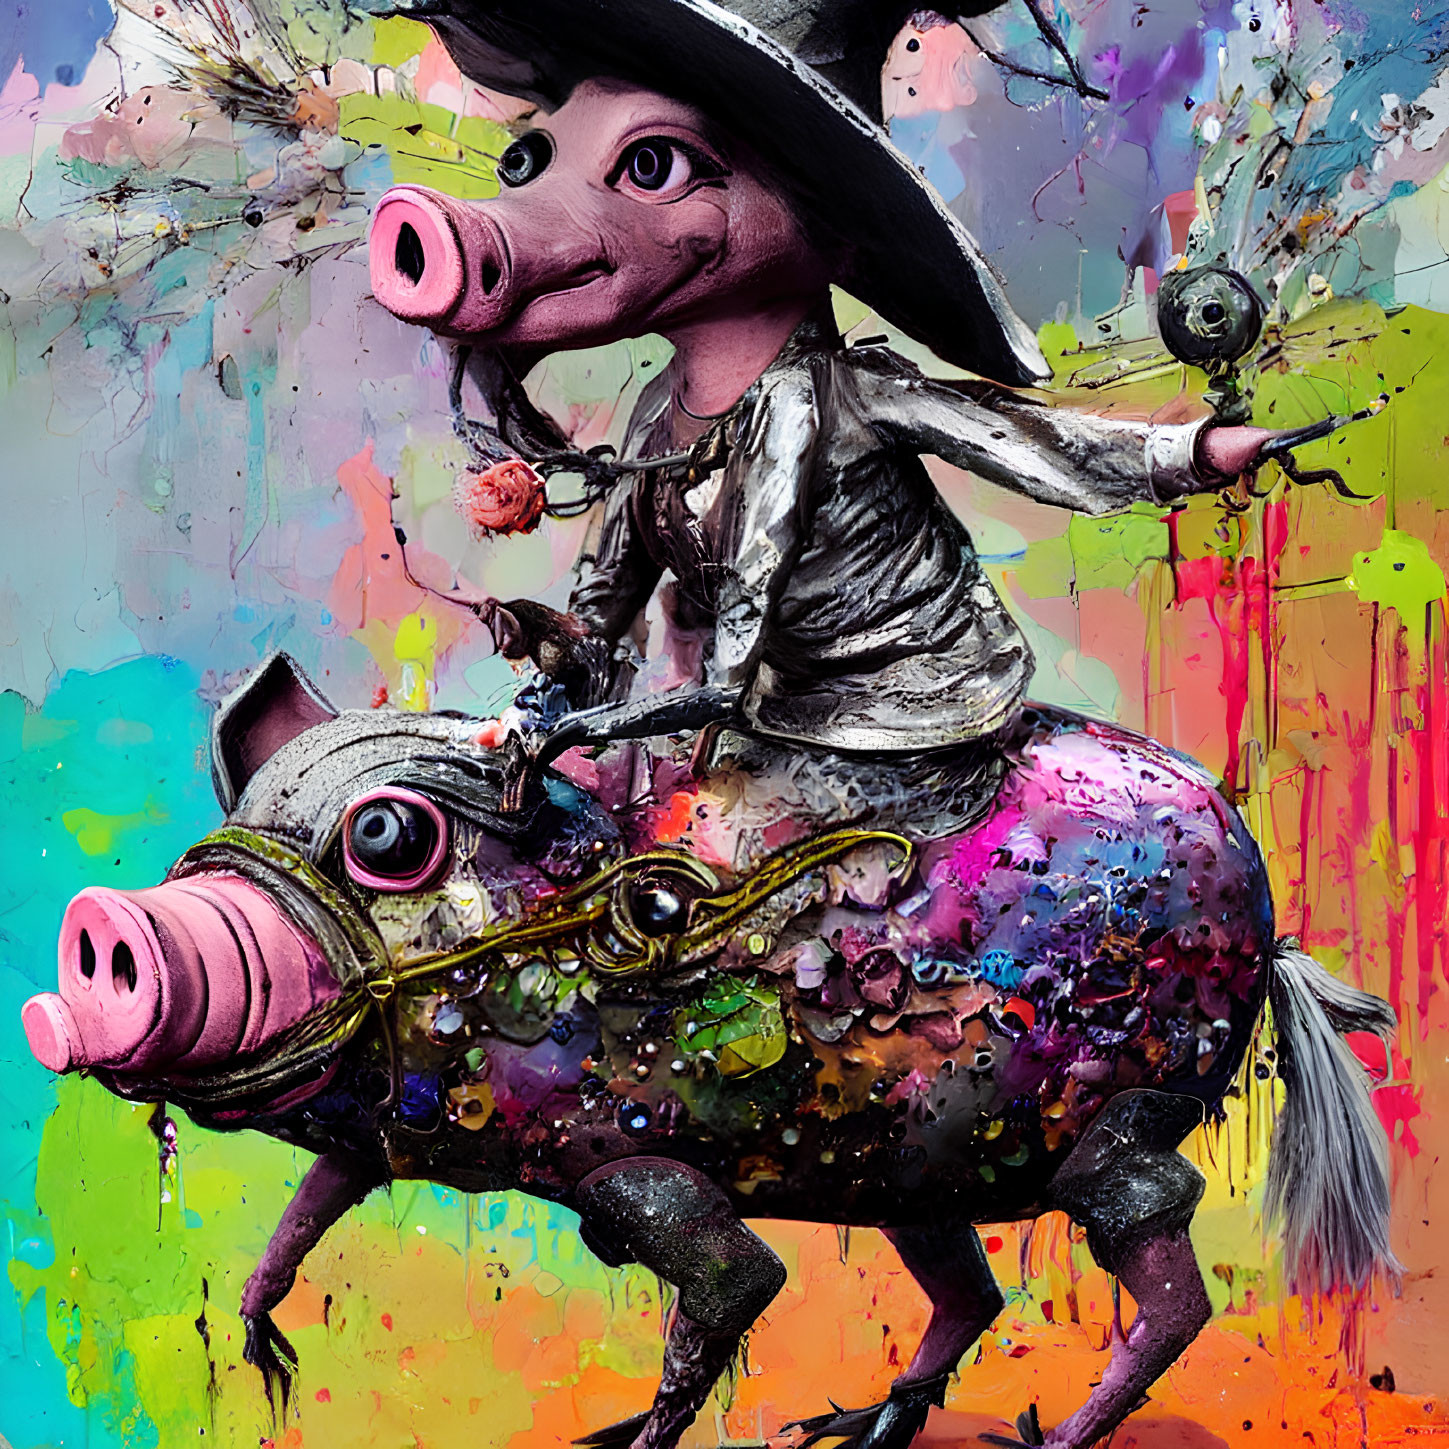 Colorful whimsical painting of anthropomorphic pig riding decorated pig